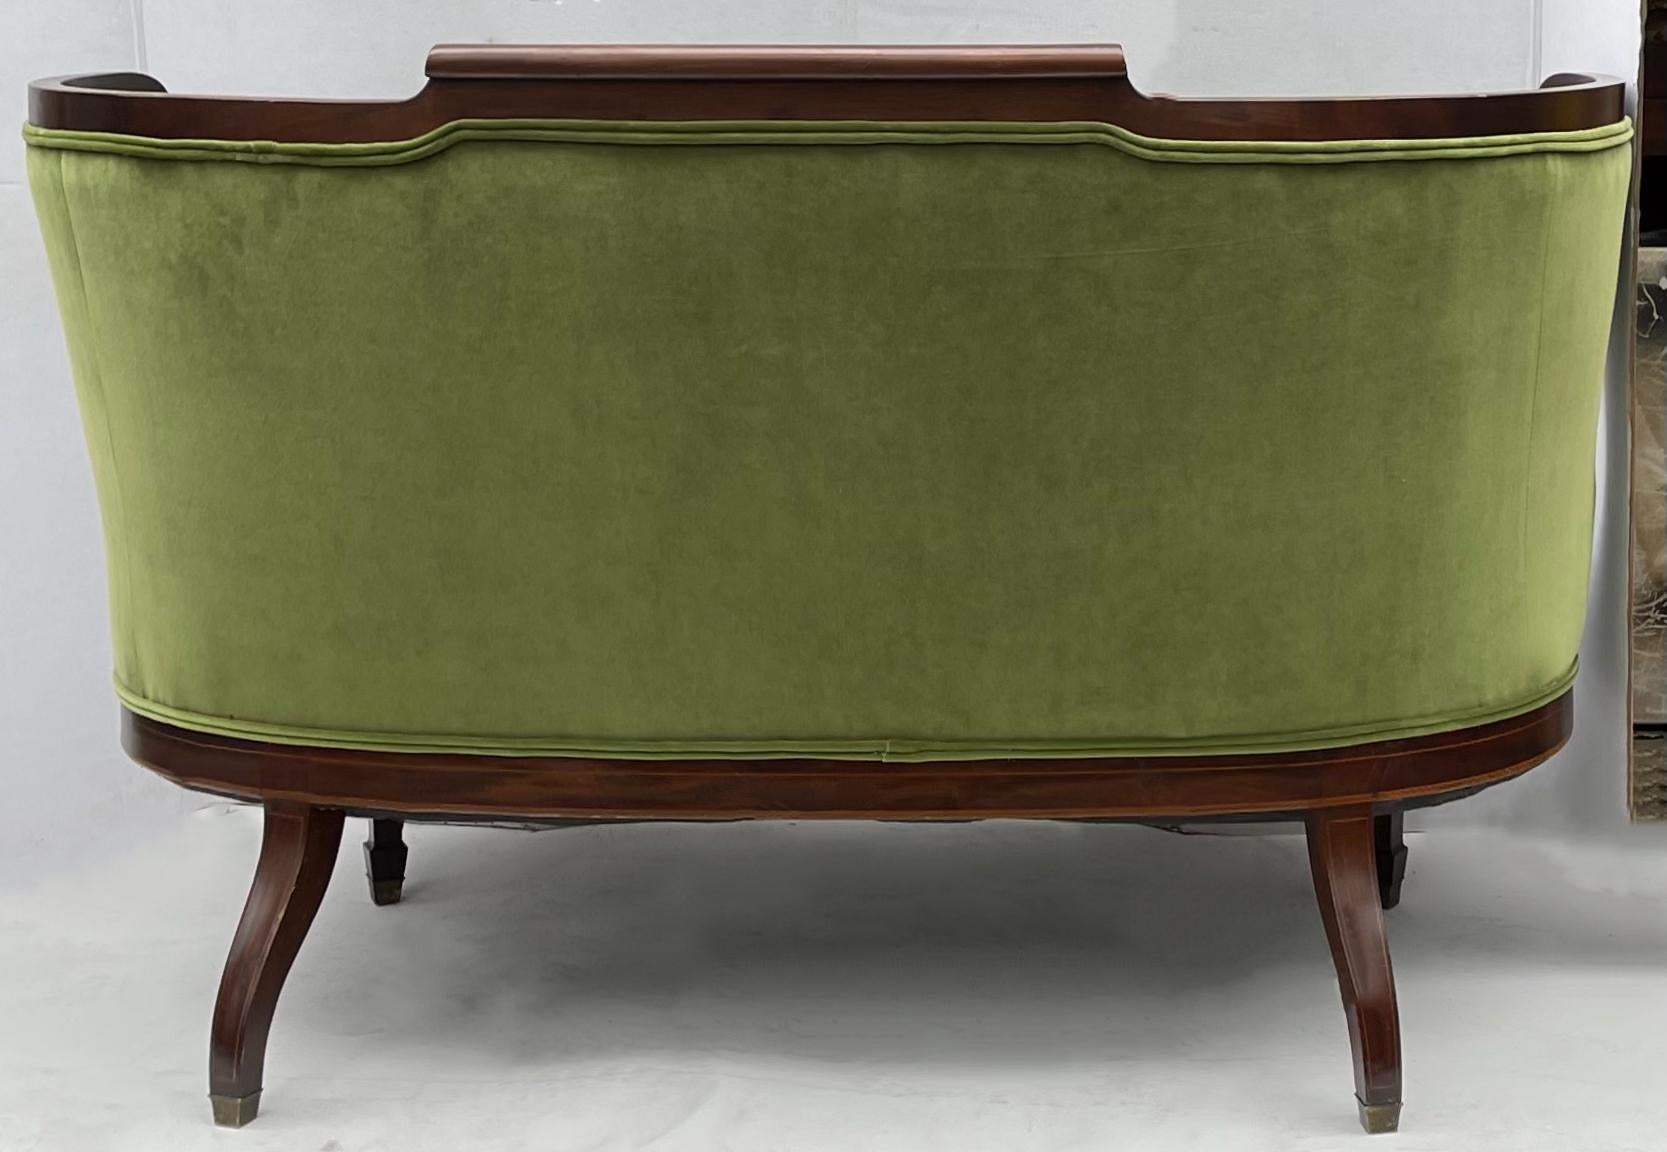 Early 20th-C. American Inlaid Mahogany Barrelback Settee in Green Velvet In Good Condition In Kennesaw, GA